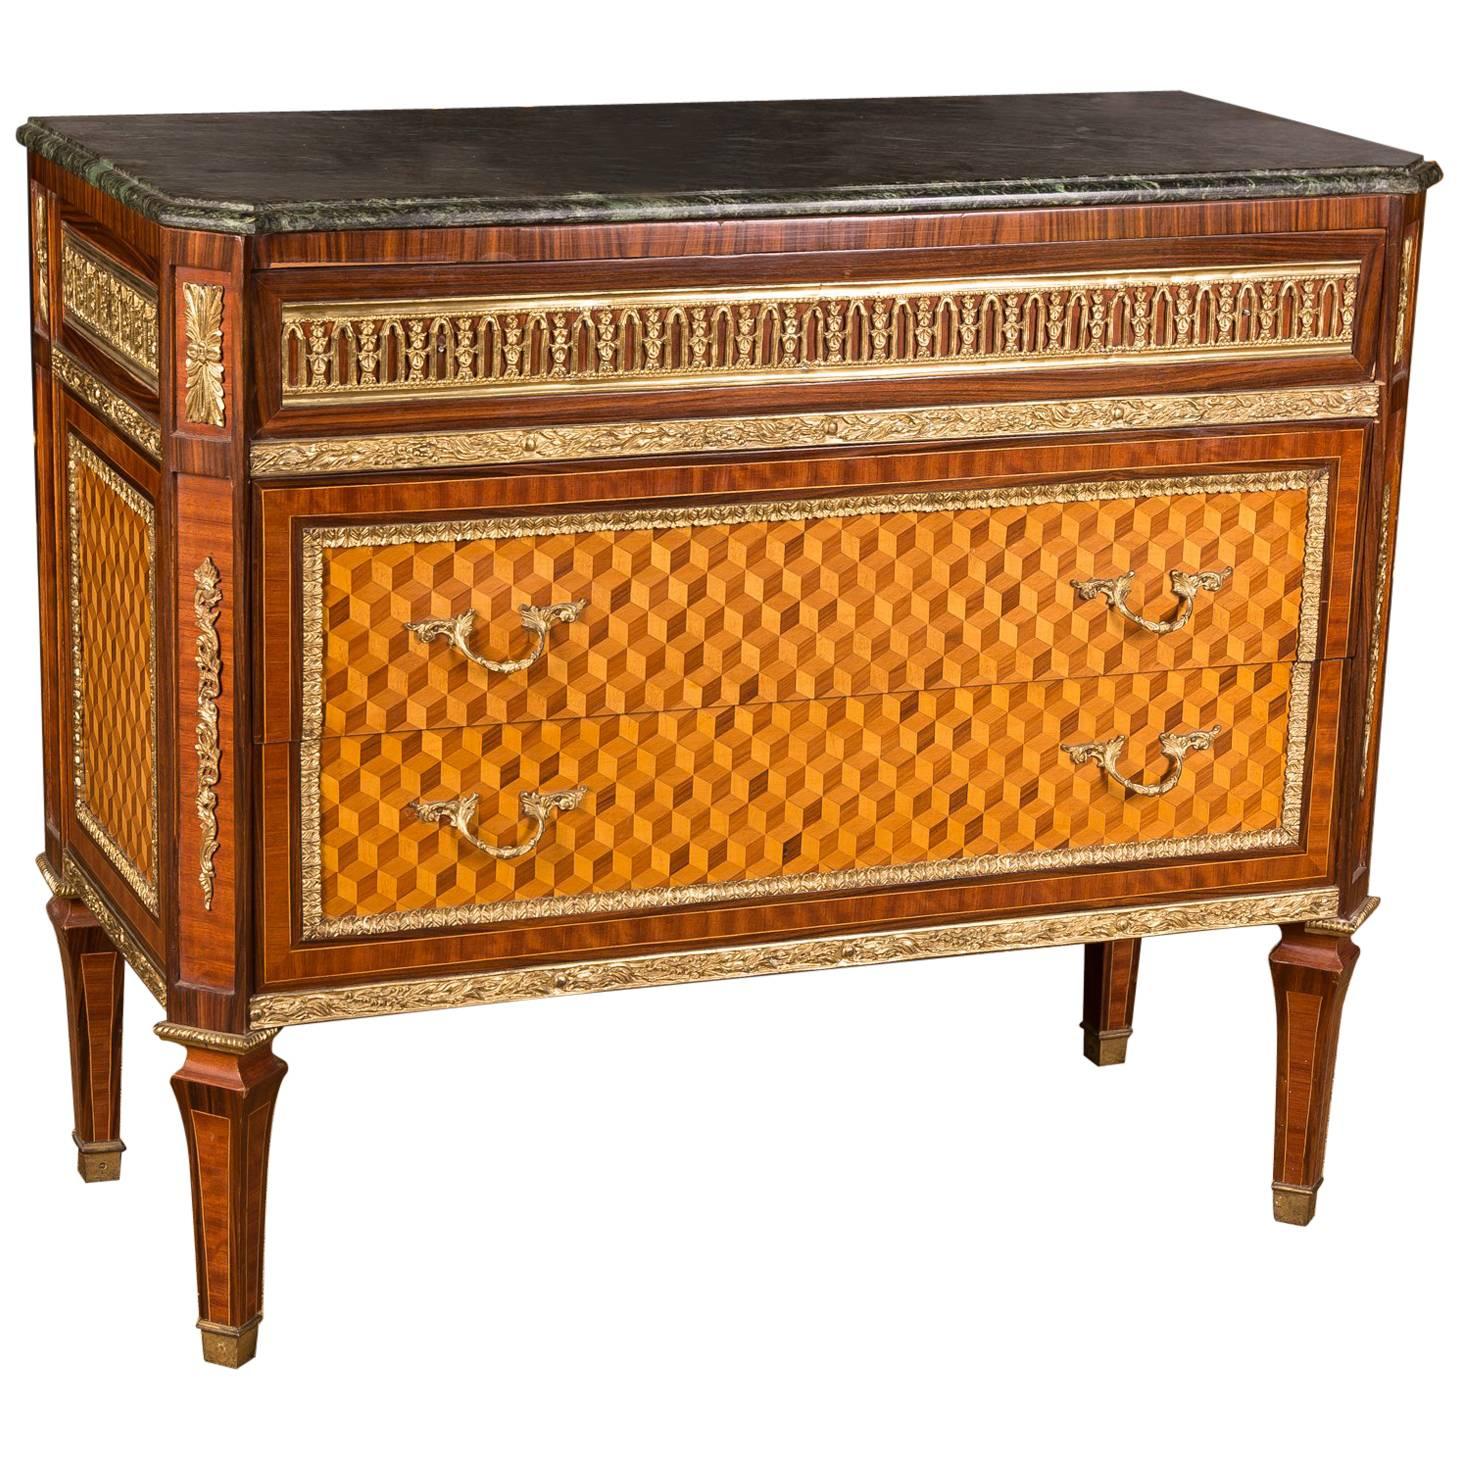 Beautiful Elegant Chest of Drawers with Marble Top in Louis Seize Style